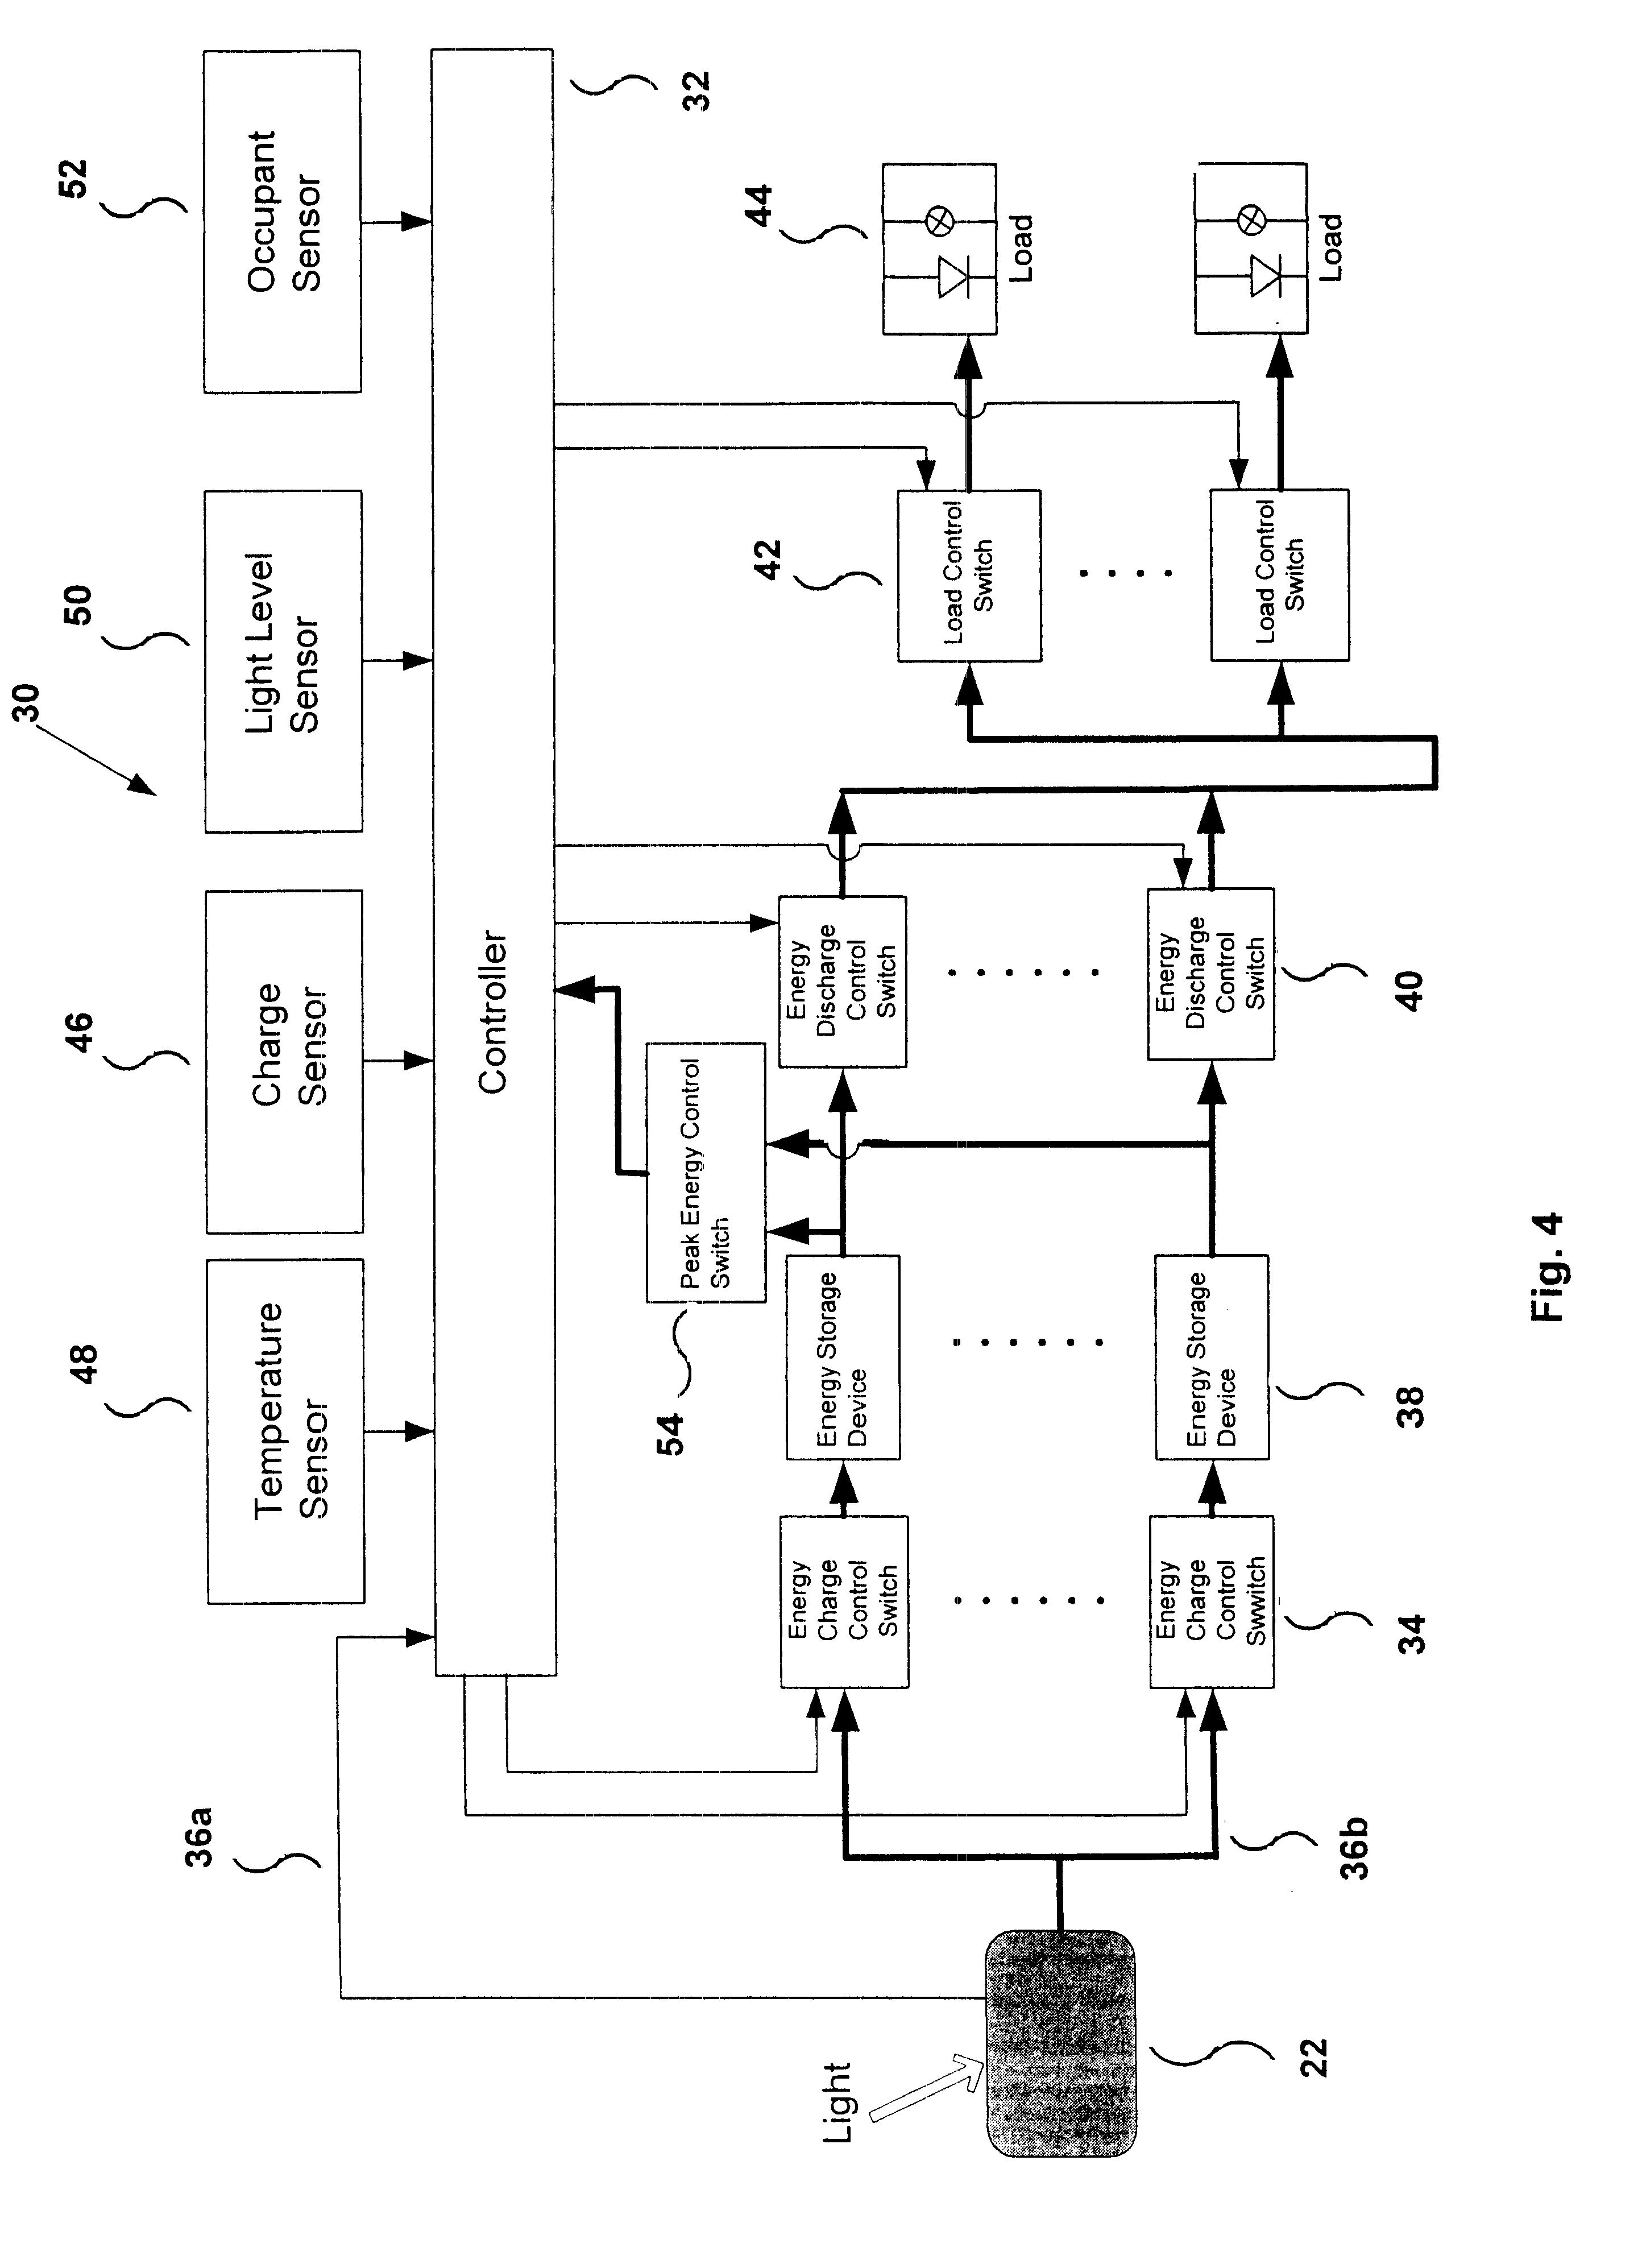 System and method of power management for a solar powered device